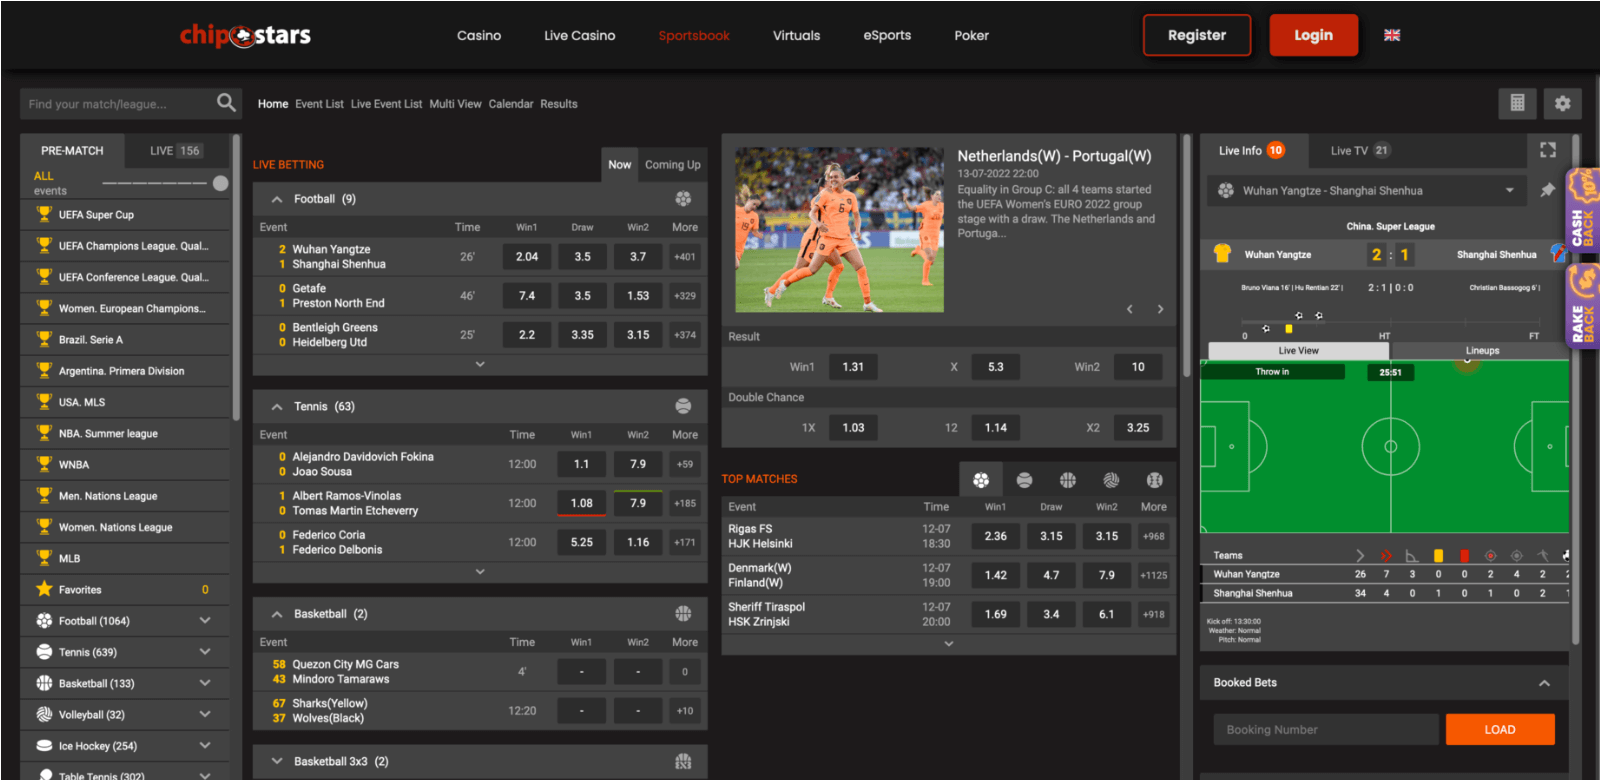 Sports betting section at the Chipstars website